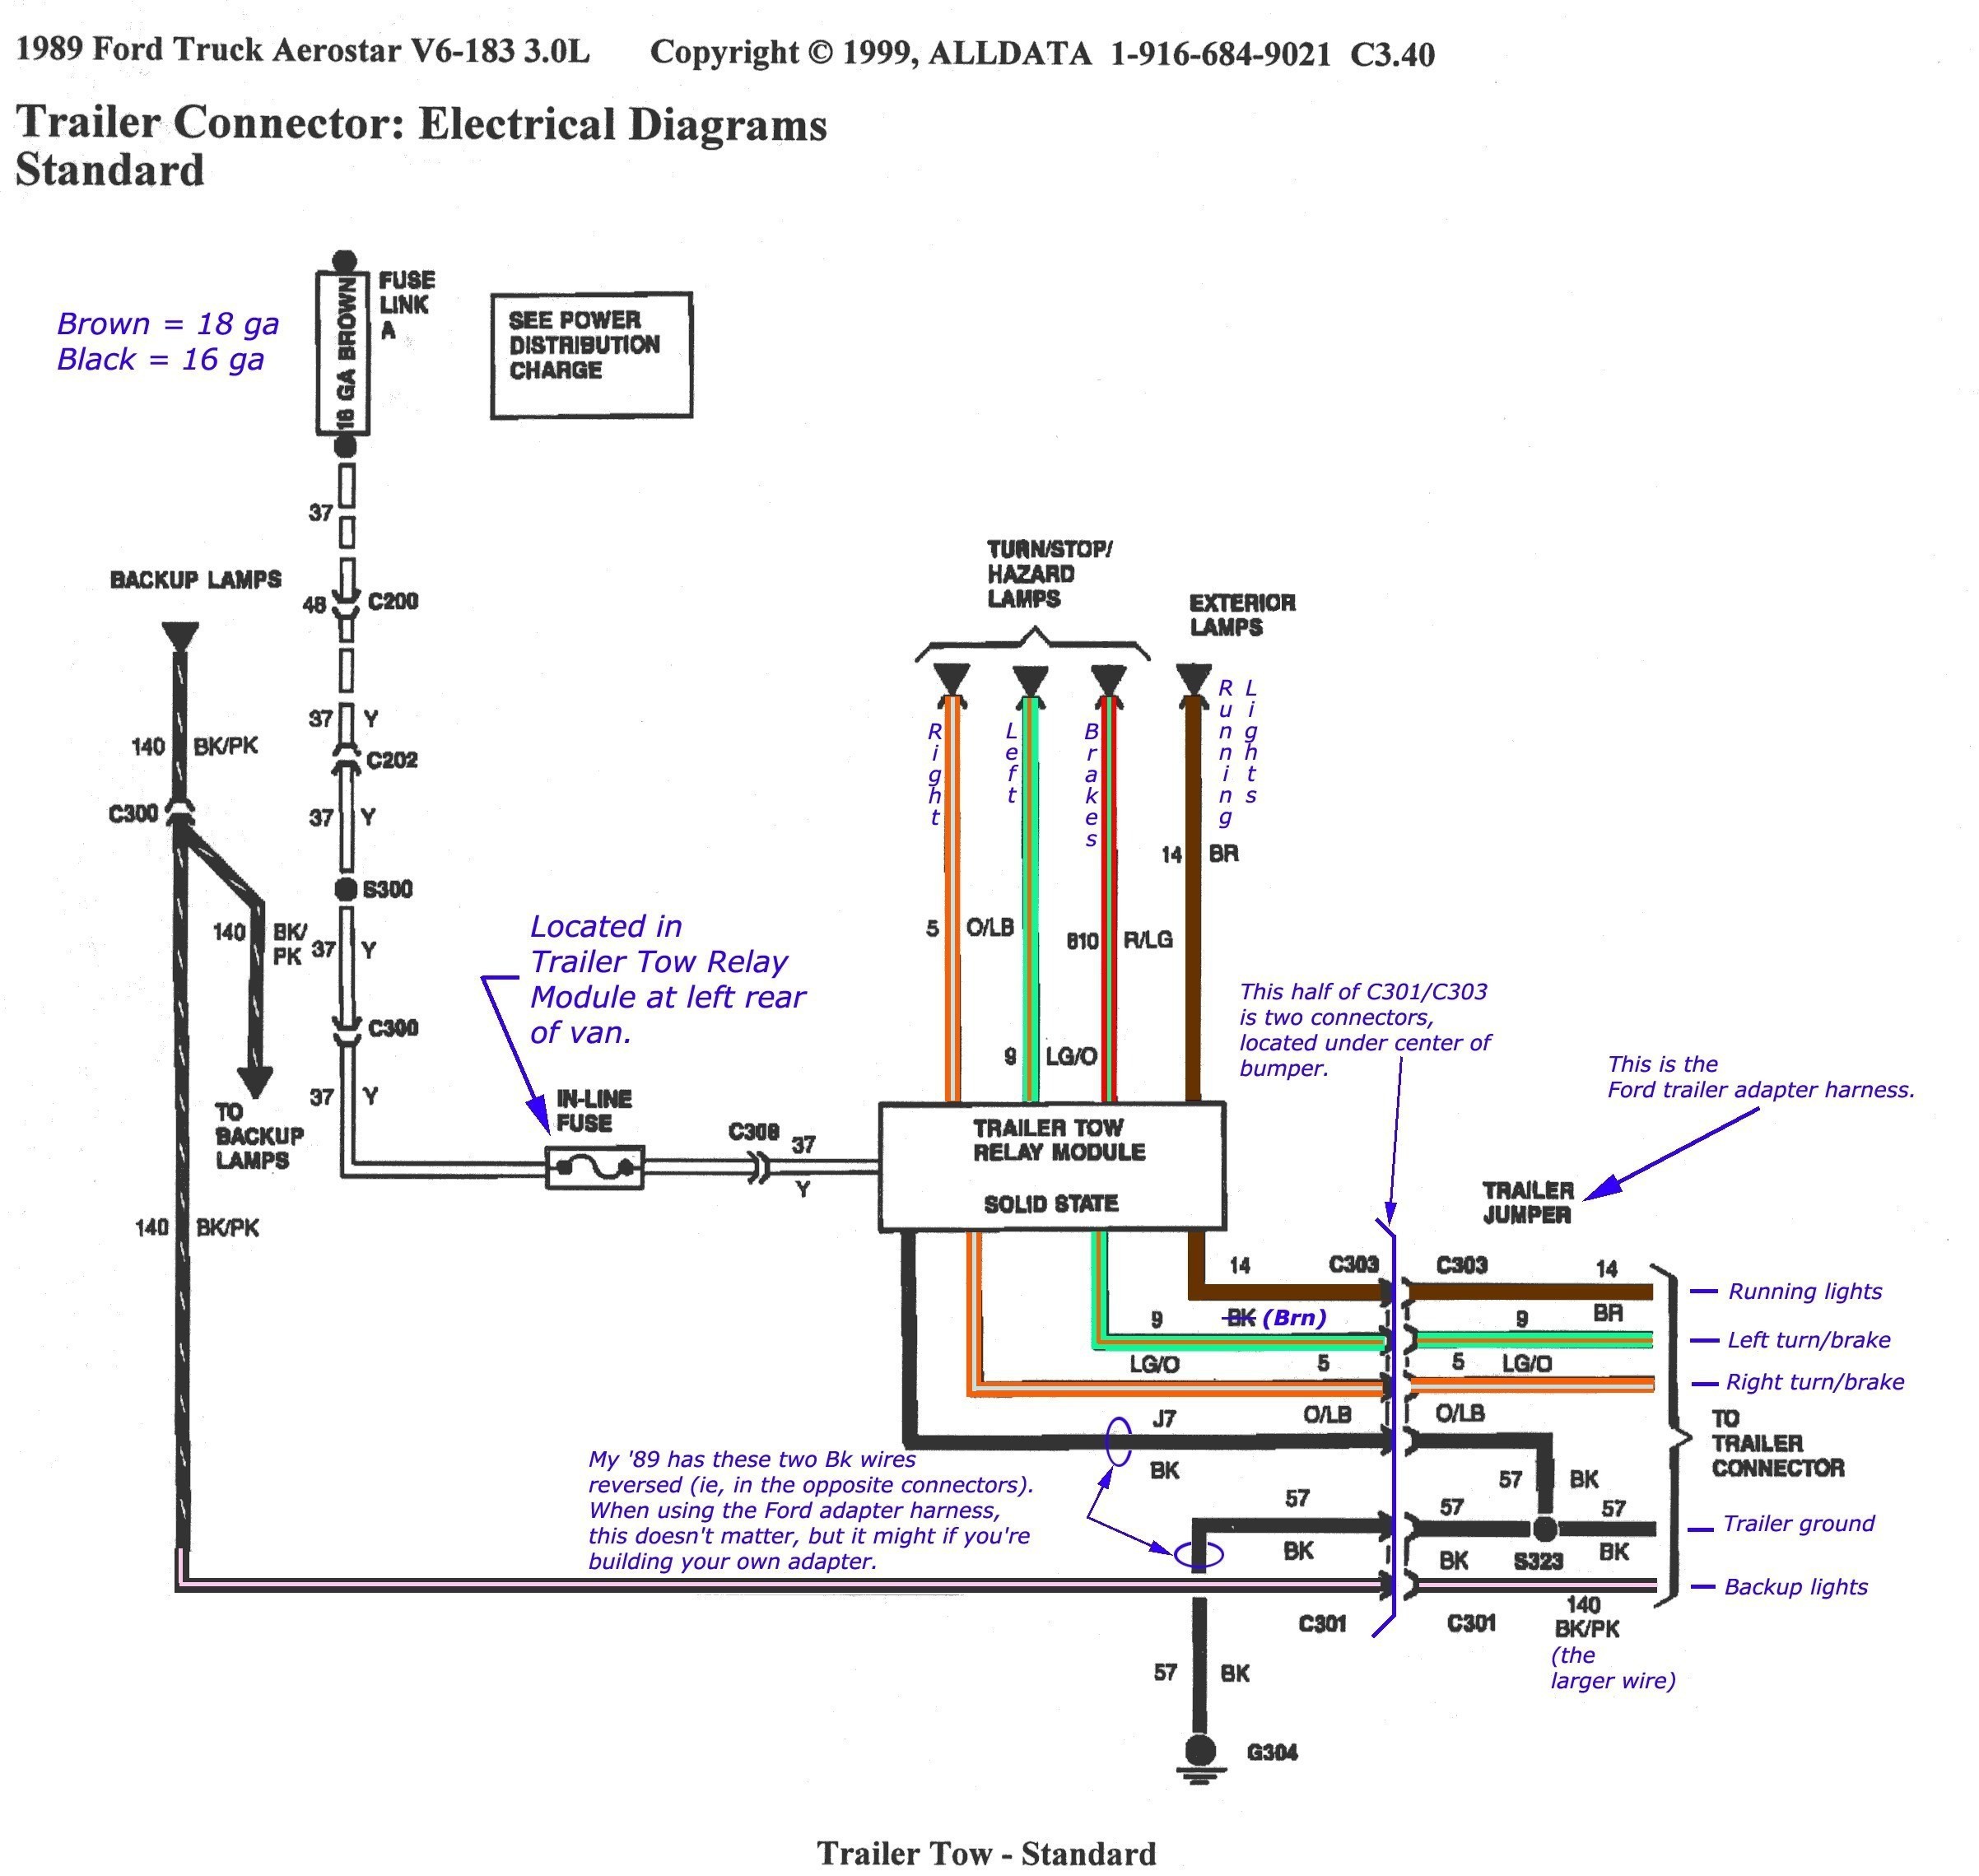 Wiring Diagrams For Utility Trailer Best Utility Trailer Wiring